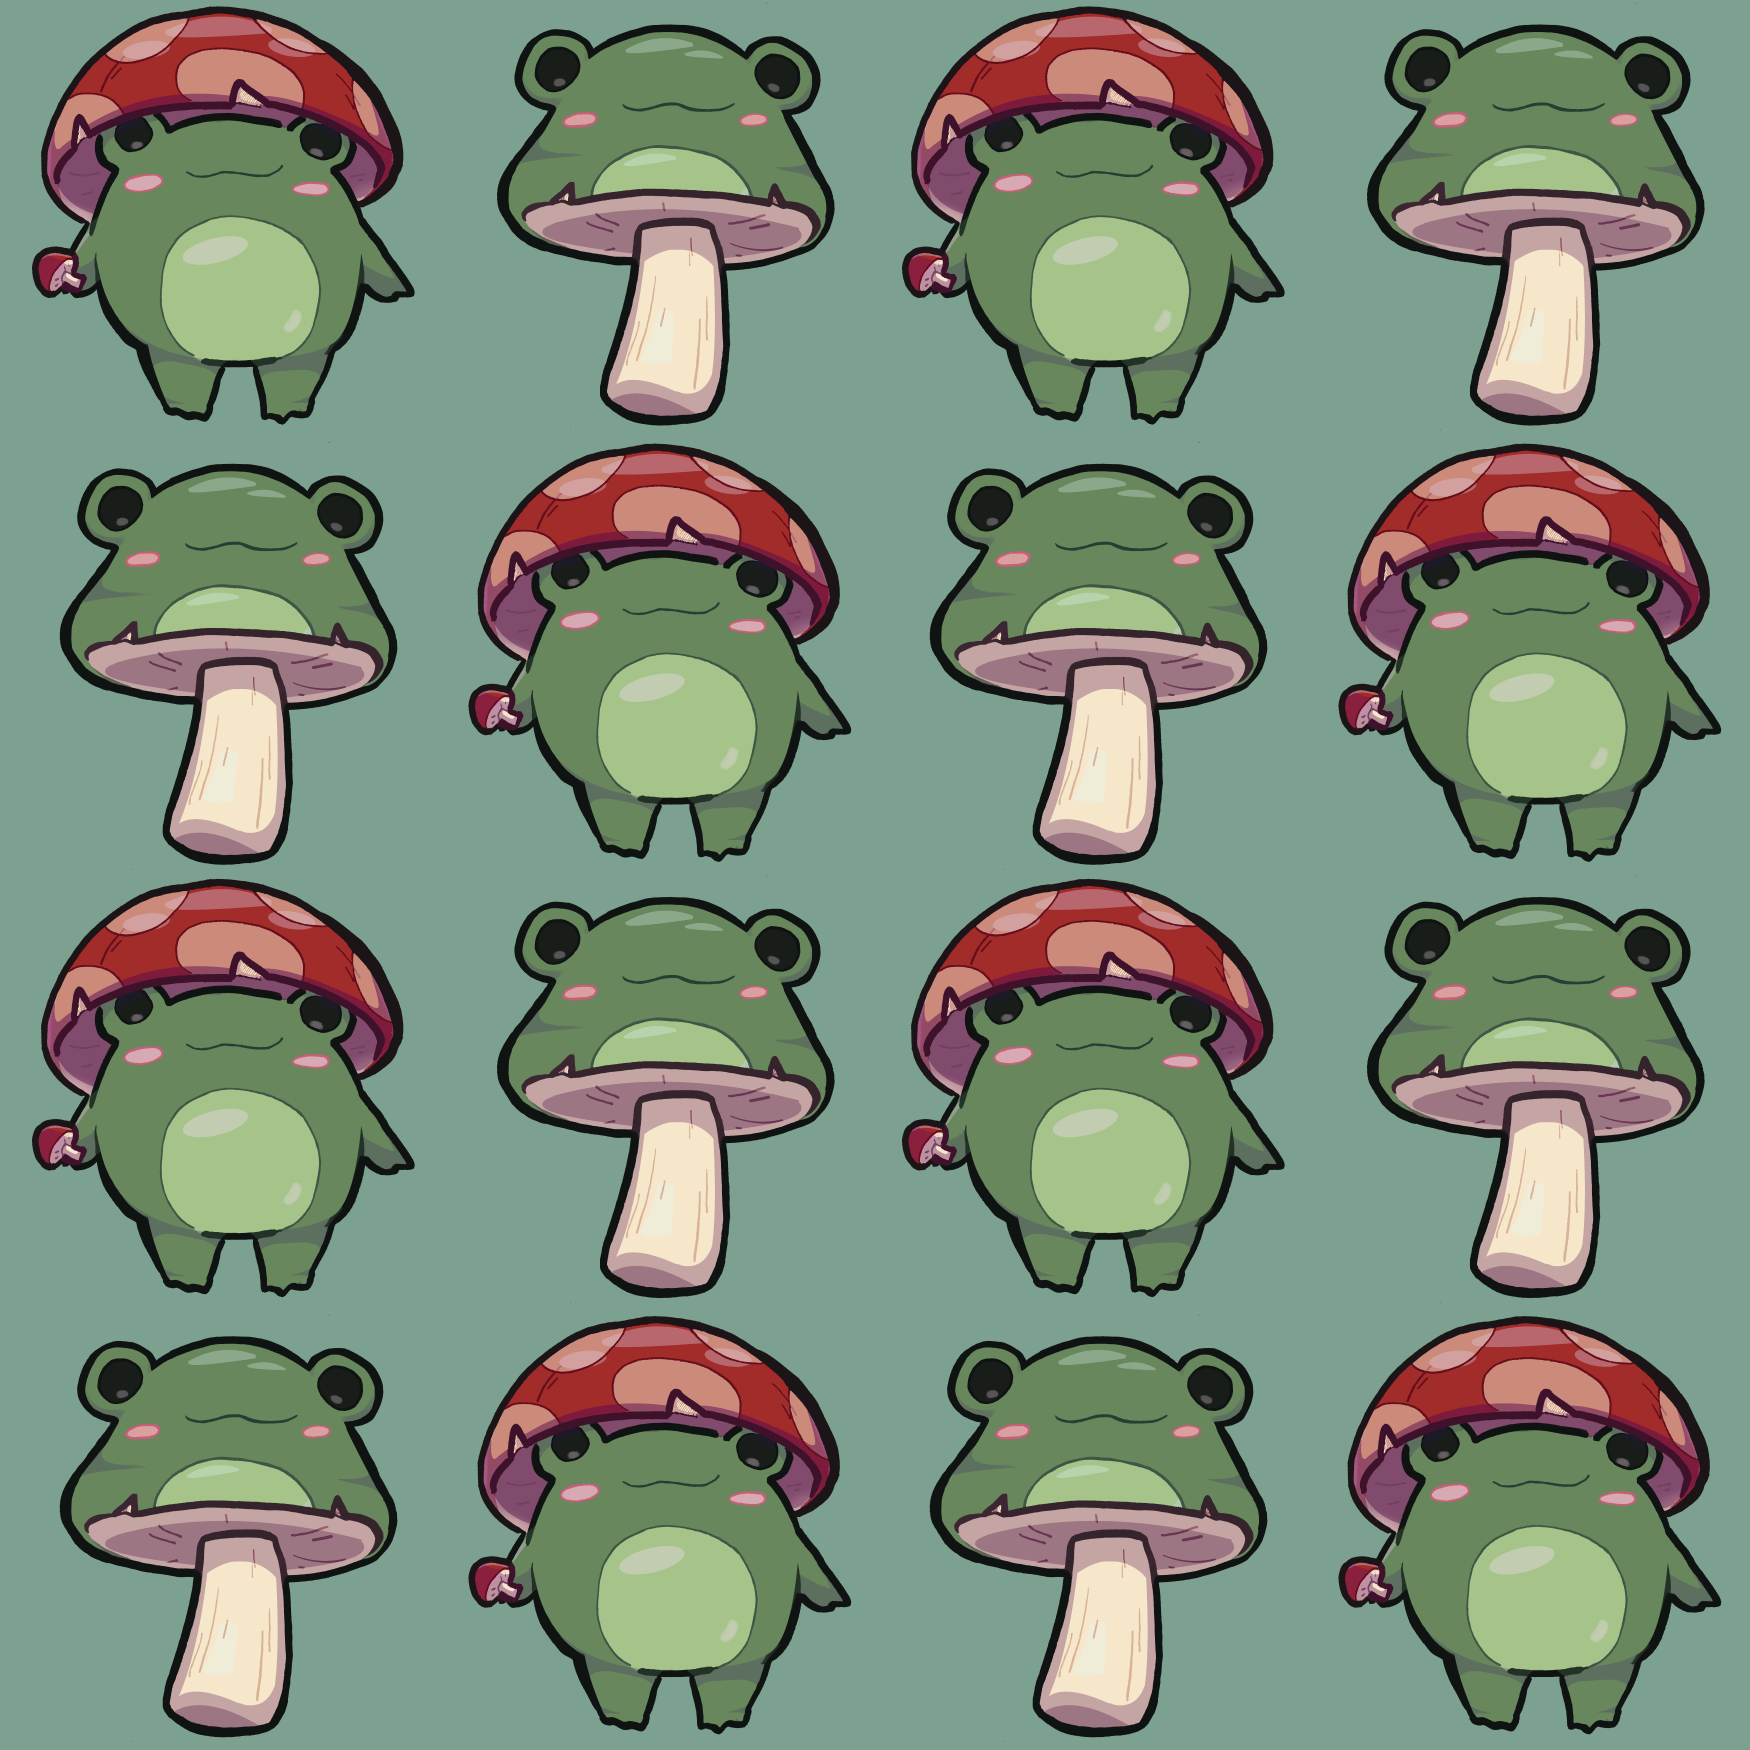 Cute Frog Wallpaper Vector Images over 750